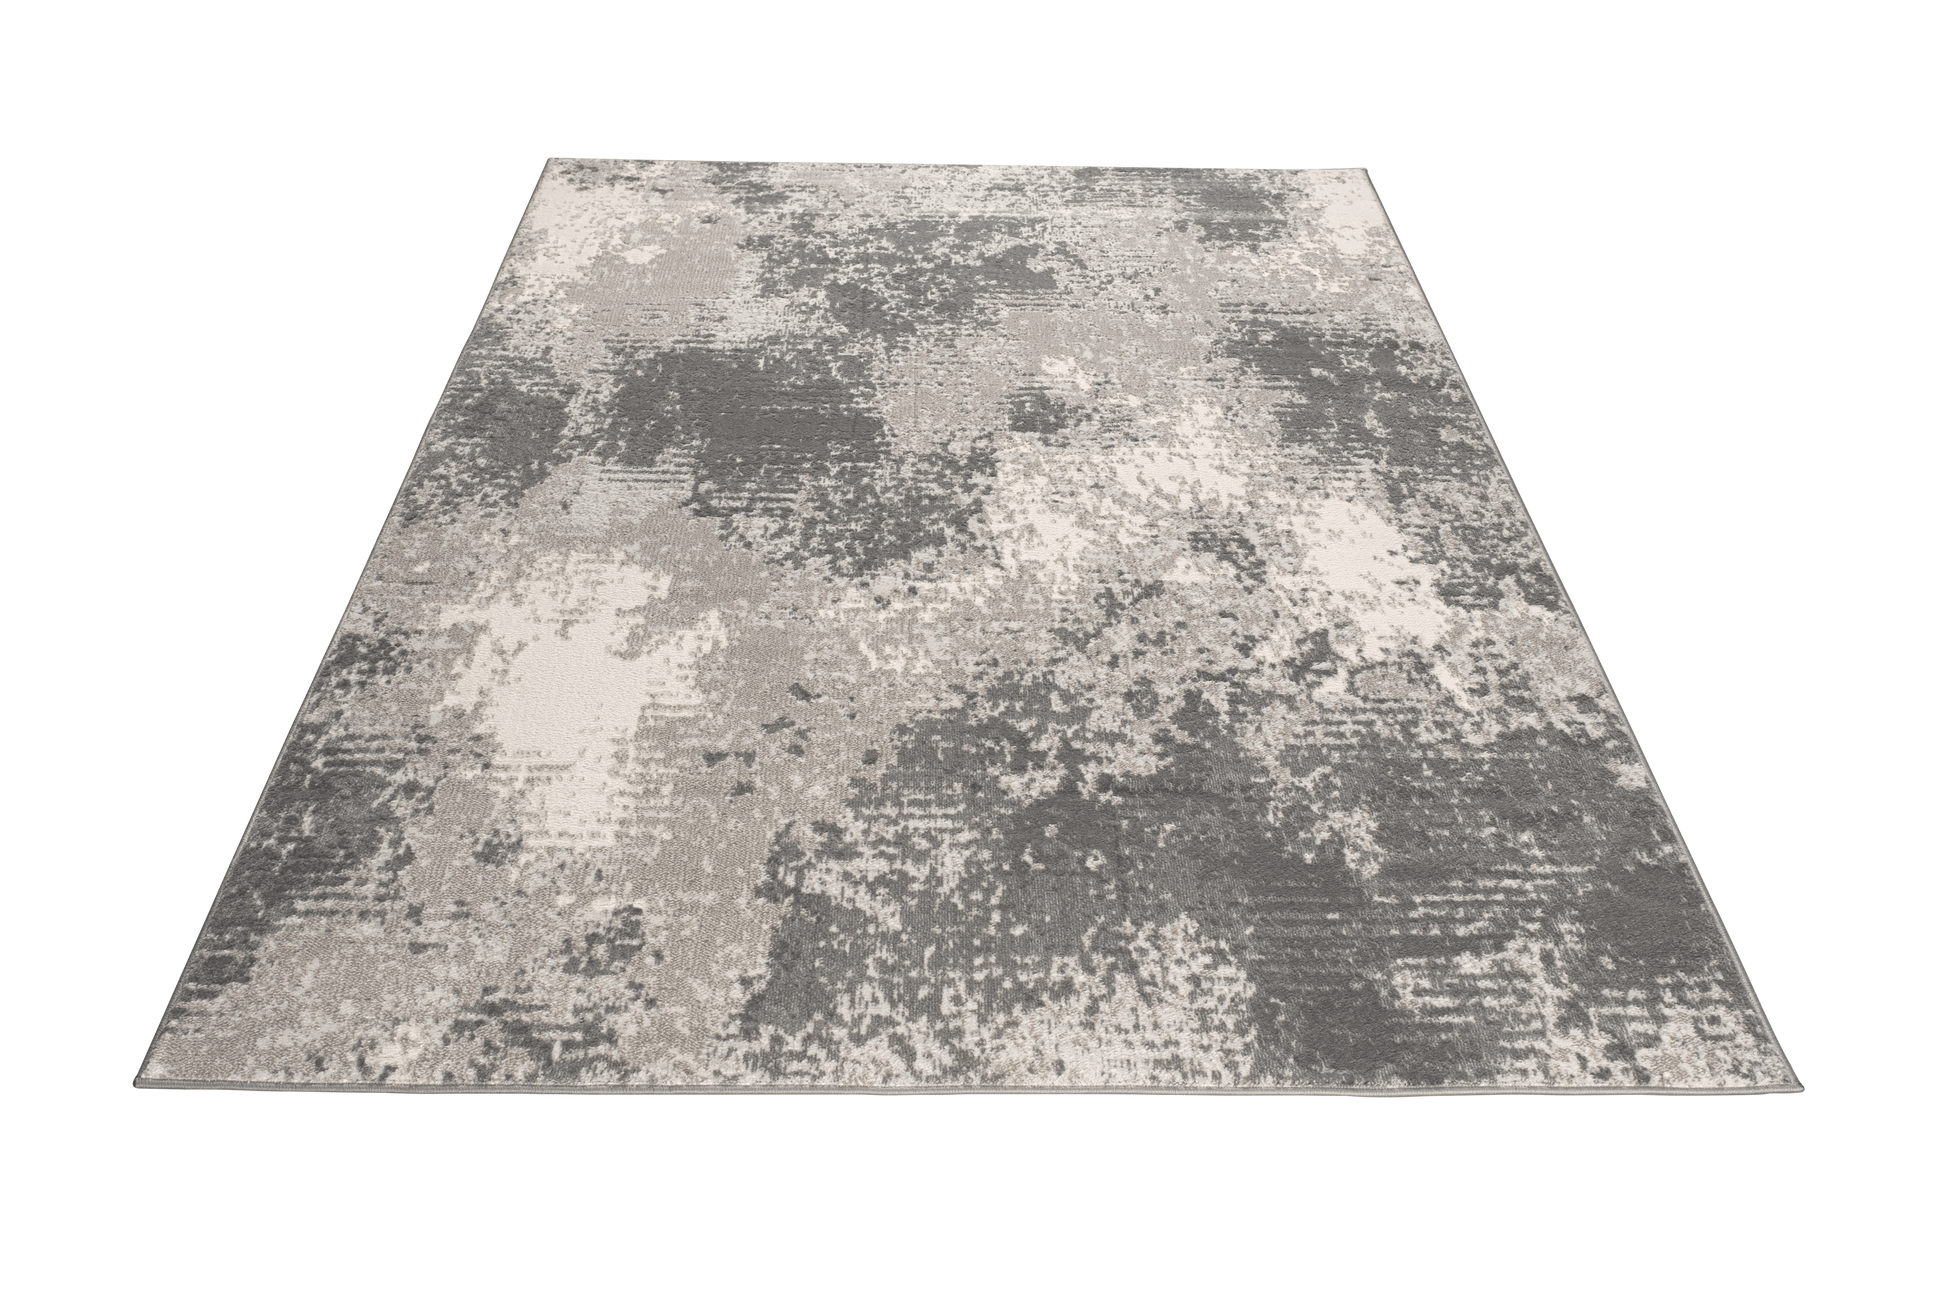 grey ivory abstract rustic minimalist modern area rug for living room bedroom 5x7, 5x8 ft Contemporary, Living Room Carpet, Bedroom, Home Office